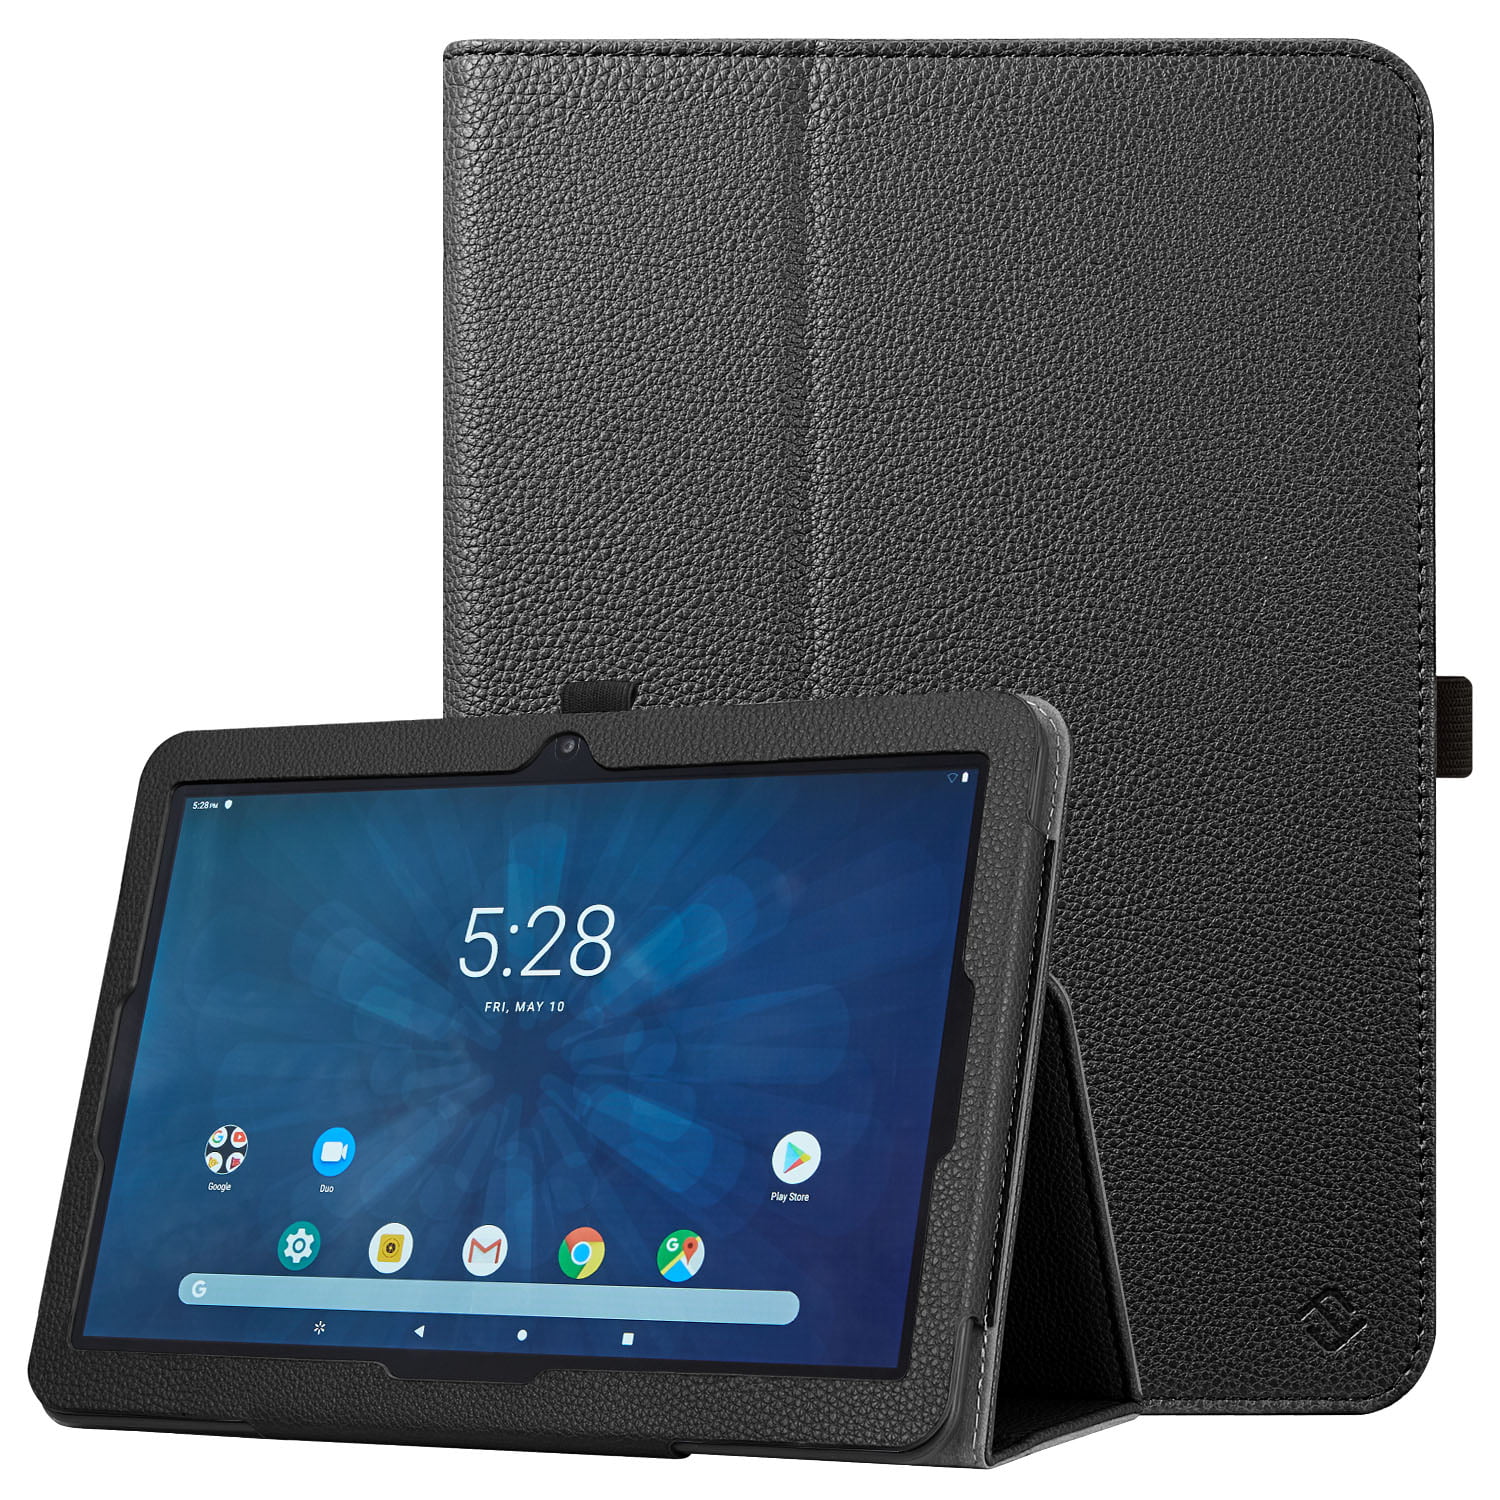 Tablet Case for 2019 Onn 10" 10.1 Inch Android Tablet - Fintie Protective Folio Cover With Stylus Holder, Black